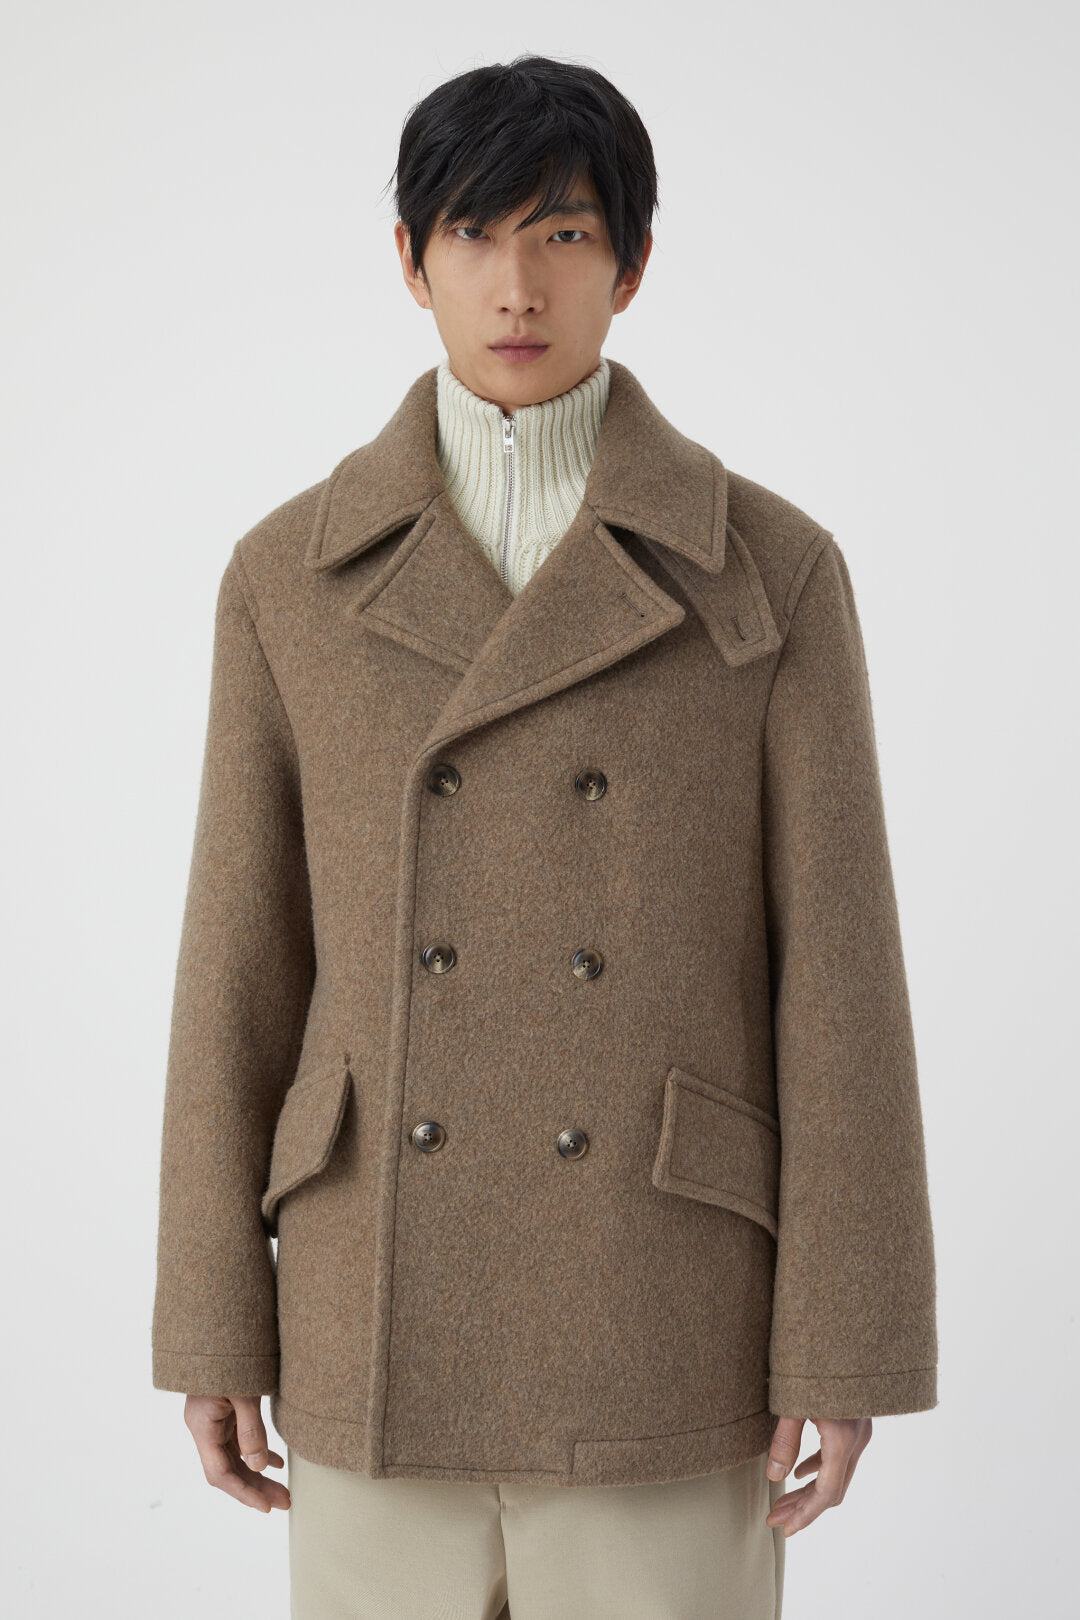 DOUBLE FACE PEACOAT - OLD PINE